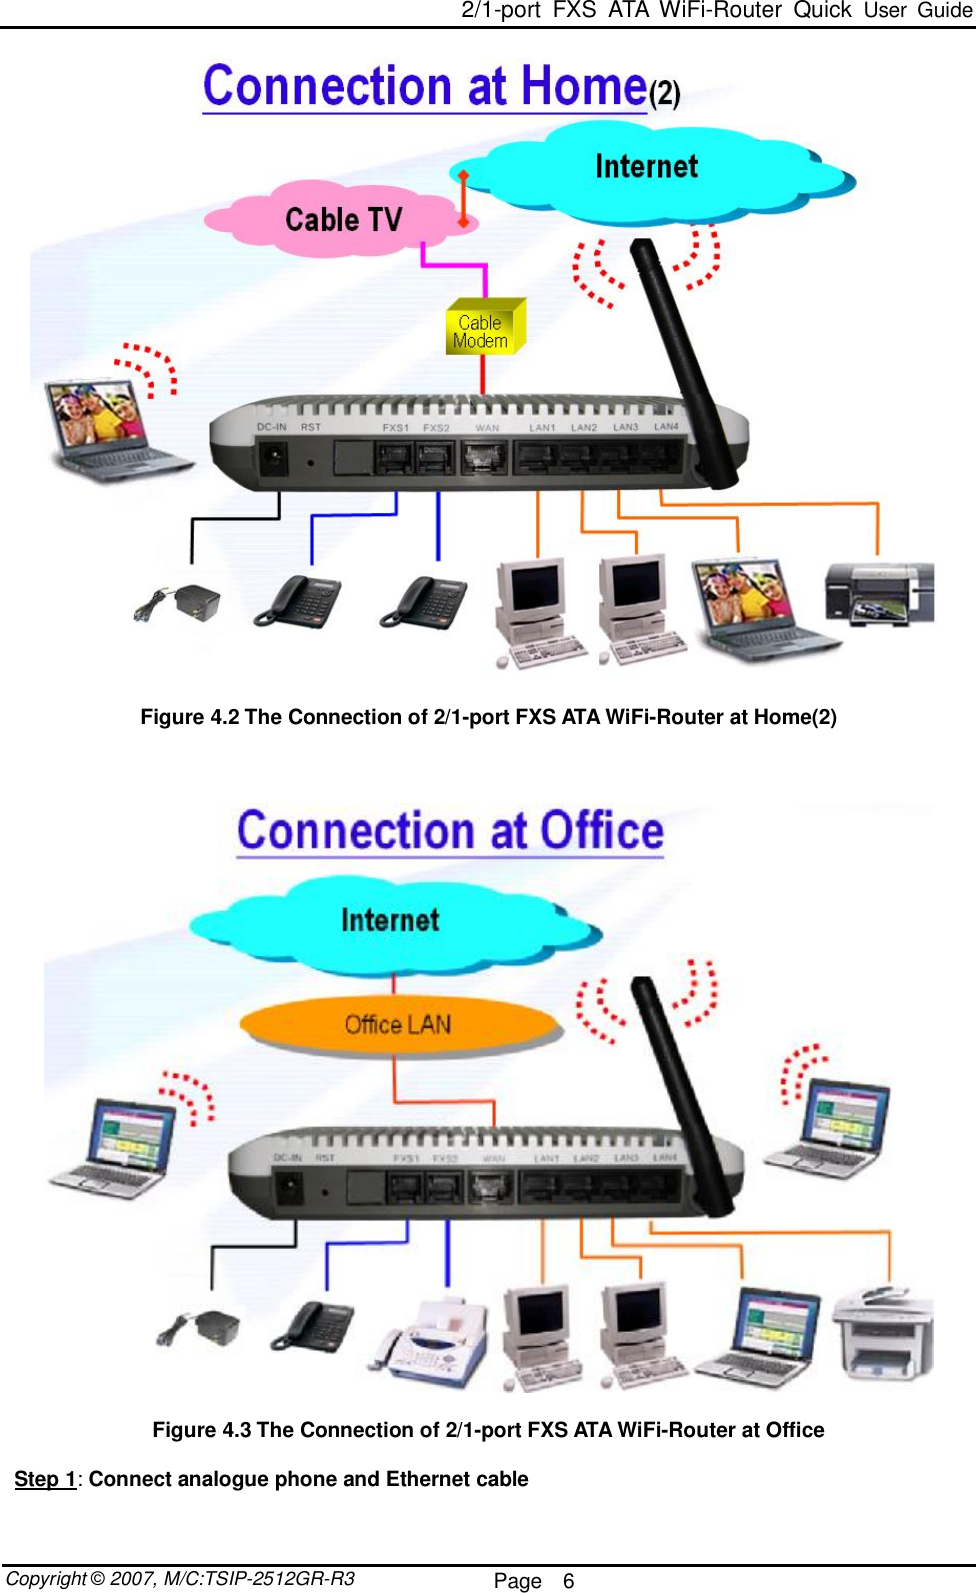  2/1-port FXS ATA WiFi-Router Quick User Guide  Copyright © 2007, M/C:TSIP-2512GR-R3  Page  6       Figure 4.2 The Connection of 2/1-port FXS ATA WiFi-Router at Home(2)      Figure 4.3 The Connection of 2/1-port FXS ATA WiFi-Router at Office  Step 1: Connect analogue phone and Ethernet cable 